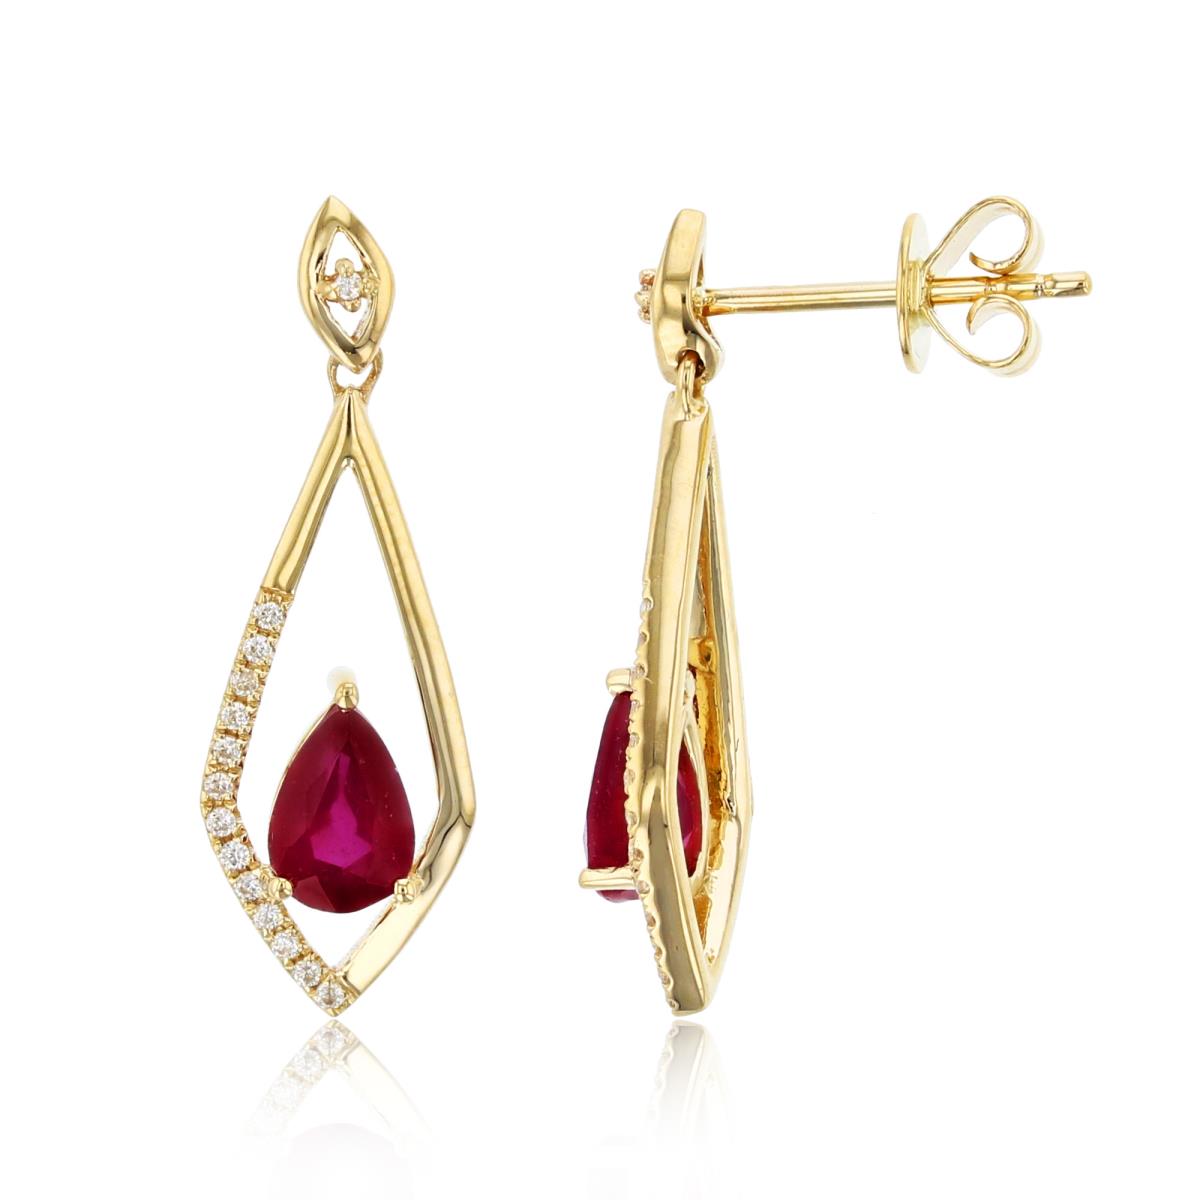 10K Yellow Gold 0.09cttw Rnd Diamonds & 6x4mm PS Glass Filled Ruby Open Rhombus Dangling Earring with Silicone Back